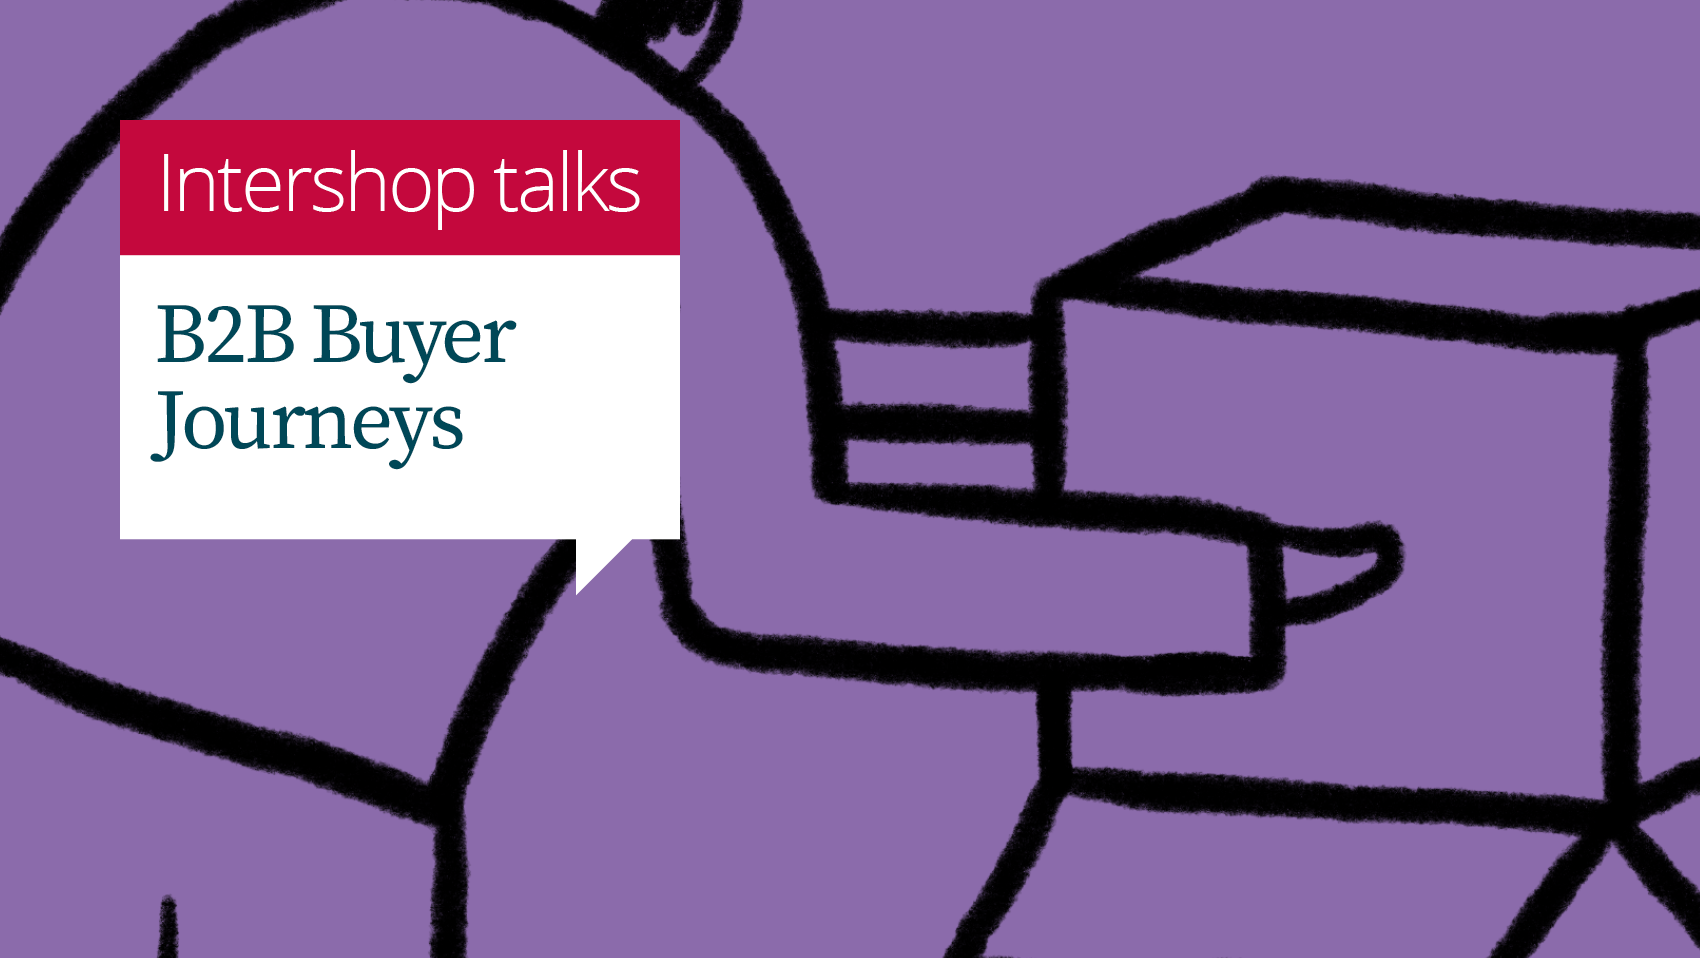 Expert talk: What lays ahead of us in B2B e-commerce?